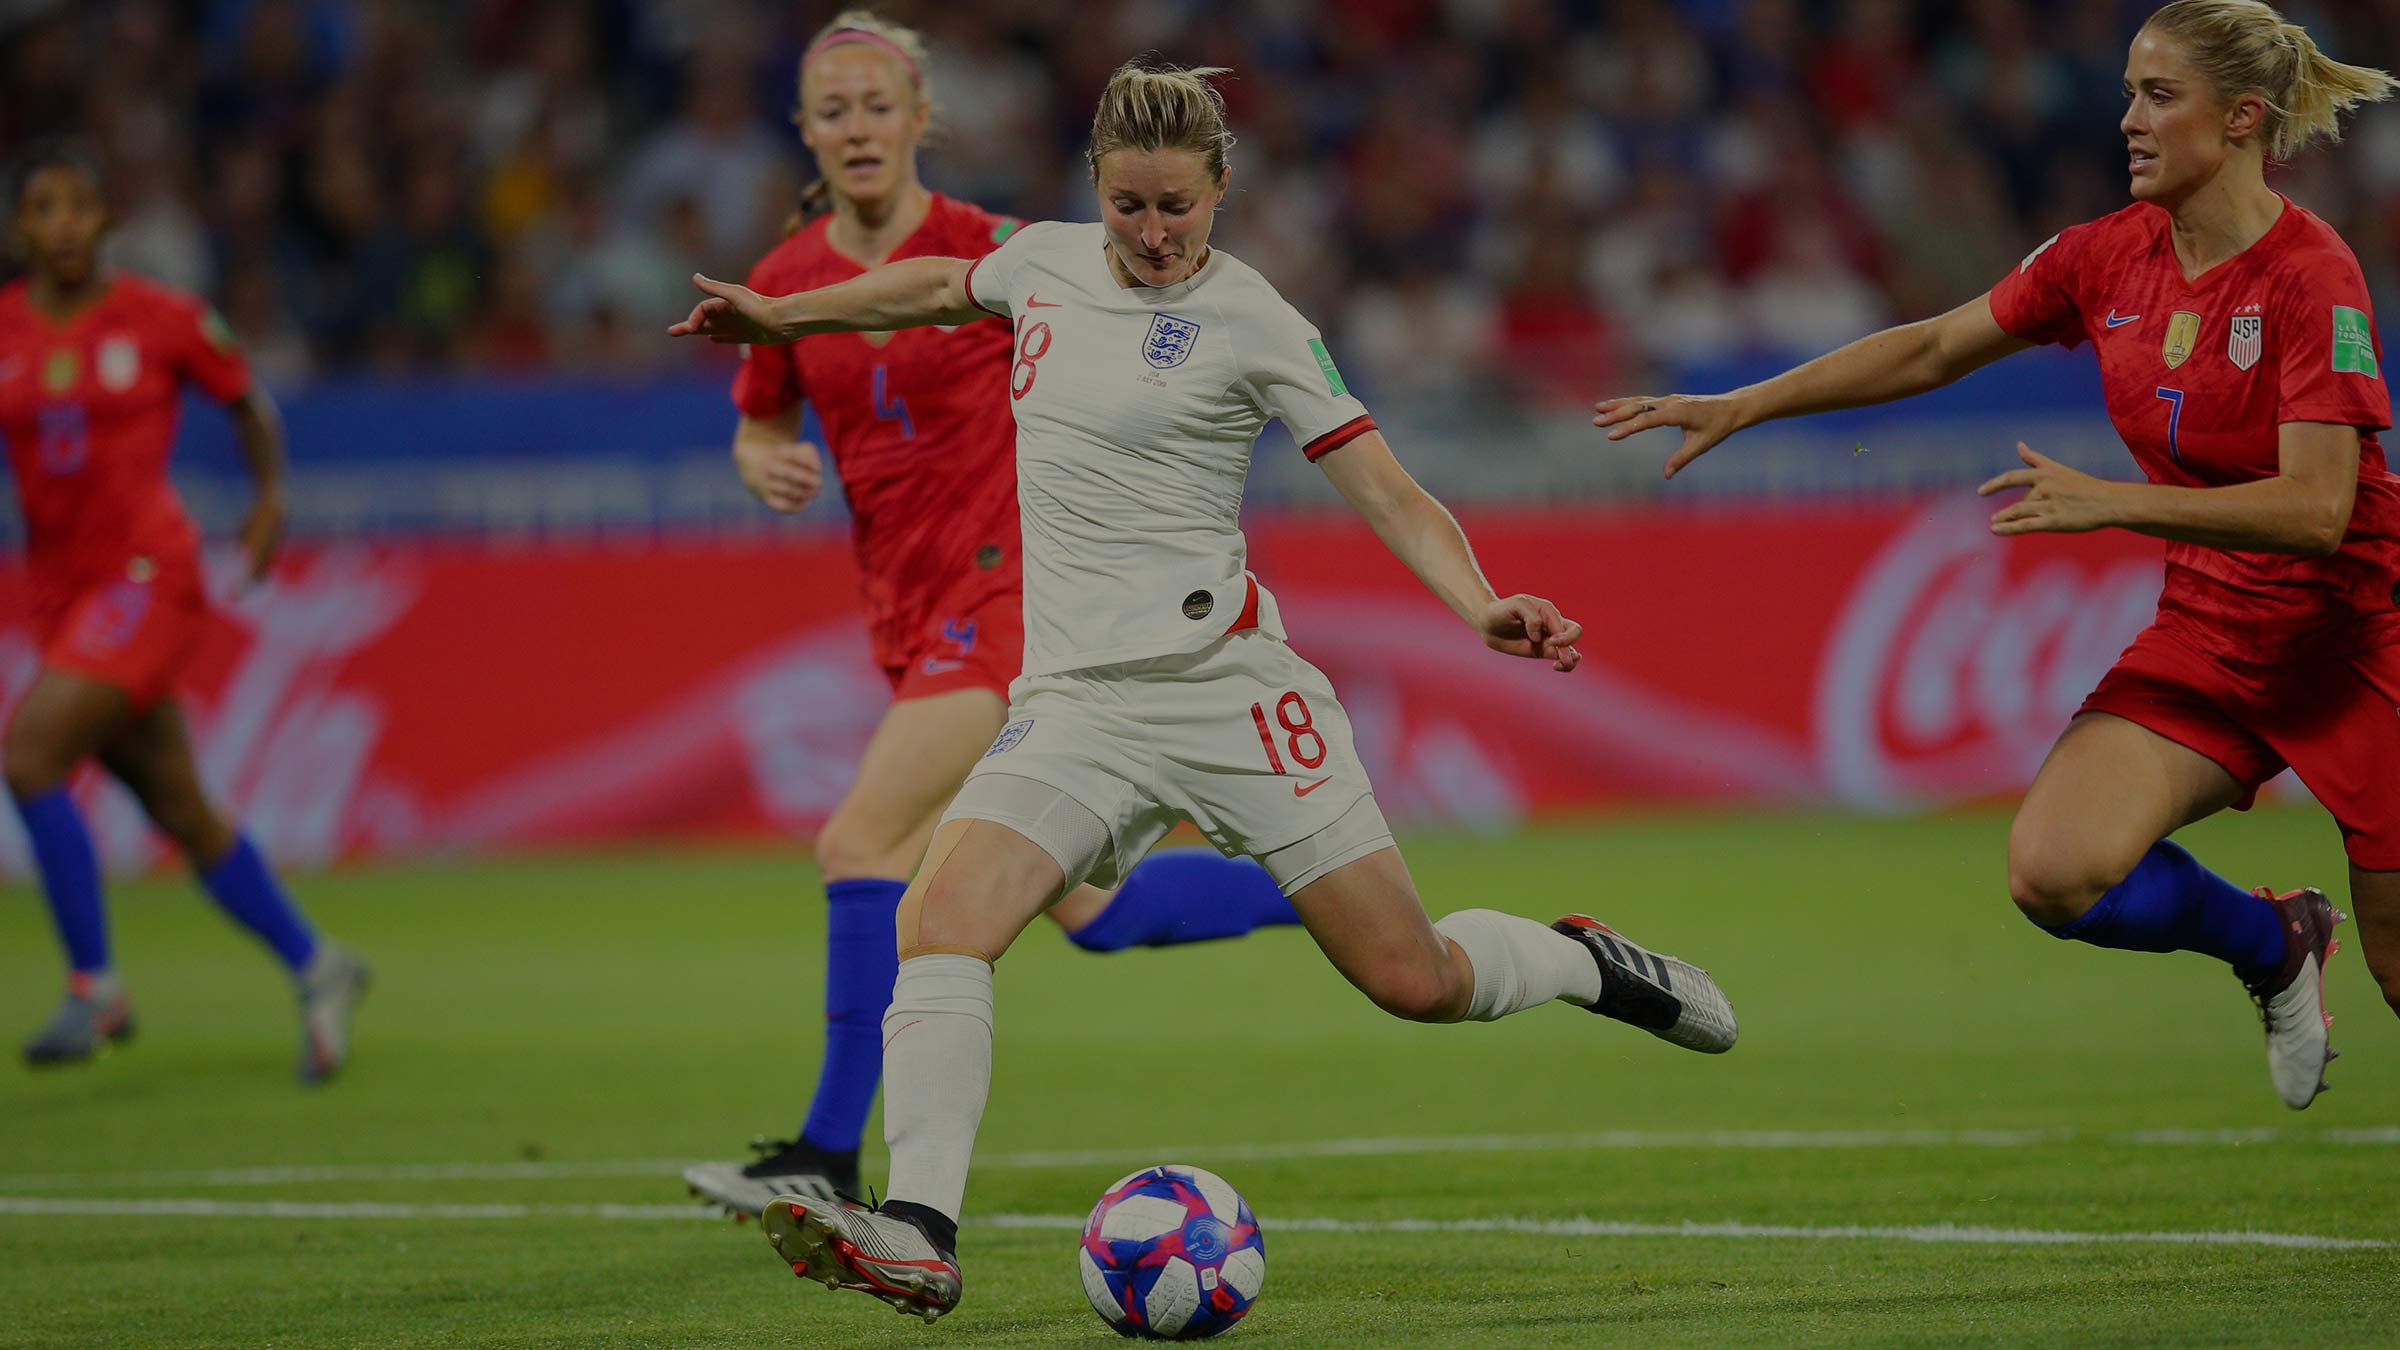 Watch the 2020 SheBelieves Cup on the BBC Virgin Media